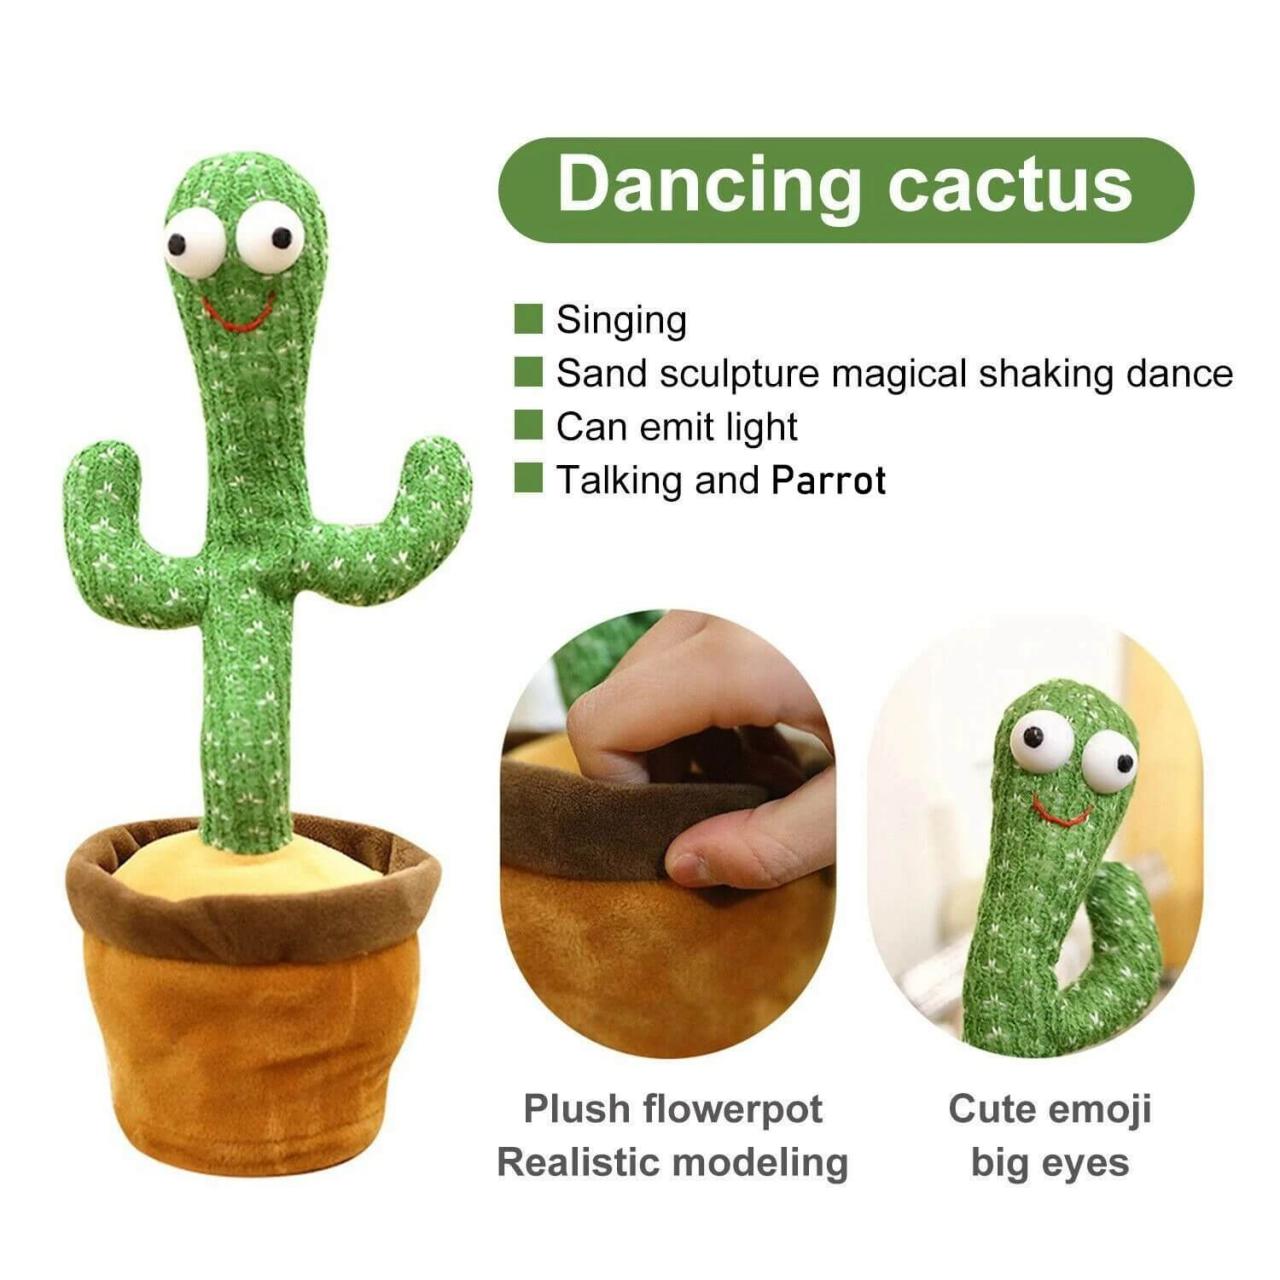 Parrot Cactus That Can Sing and Dance